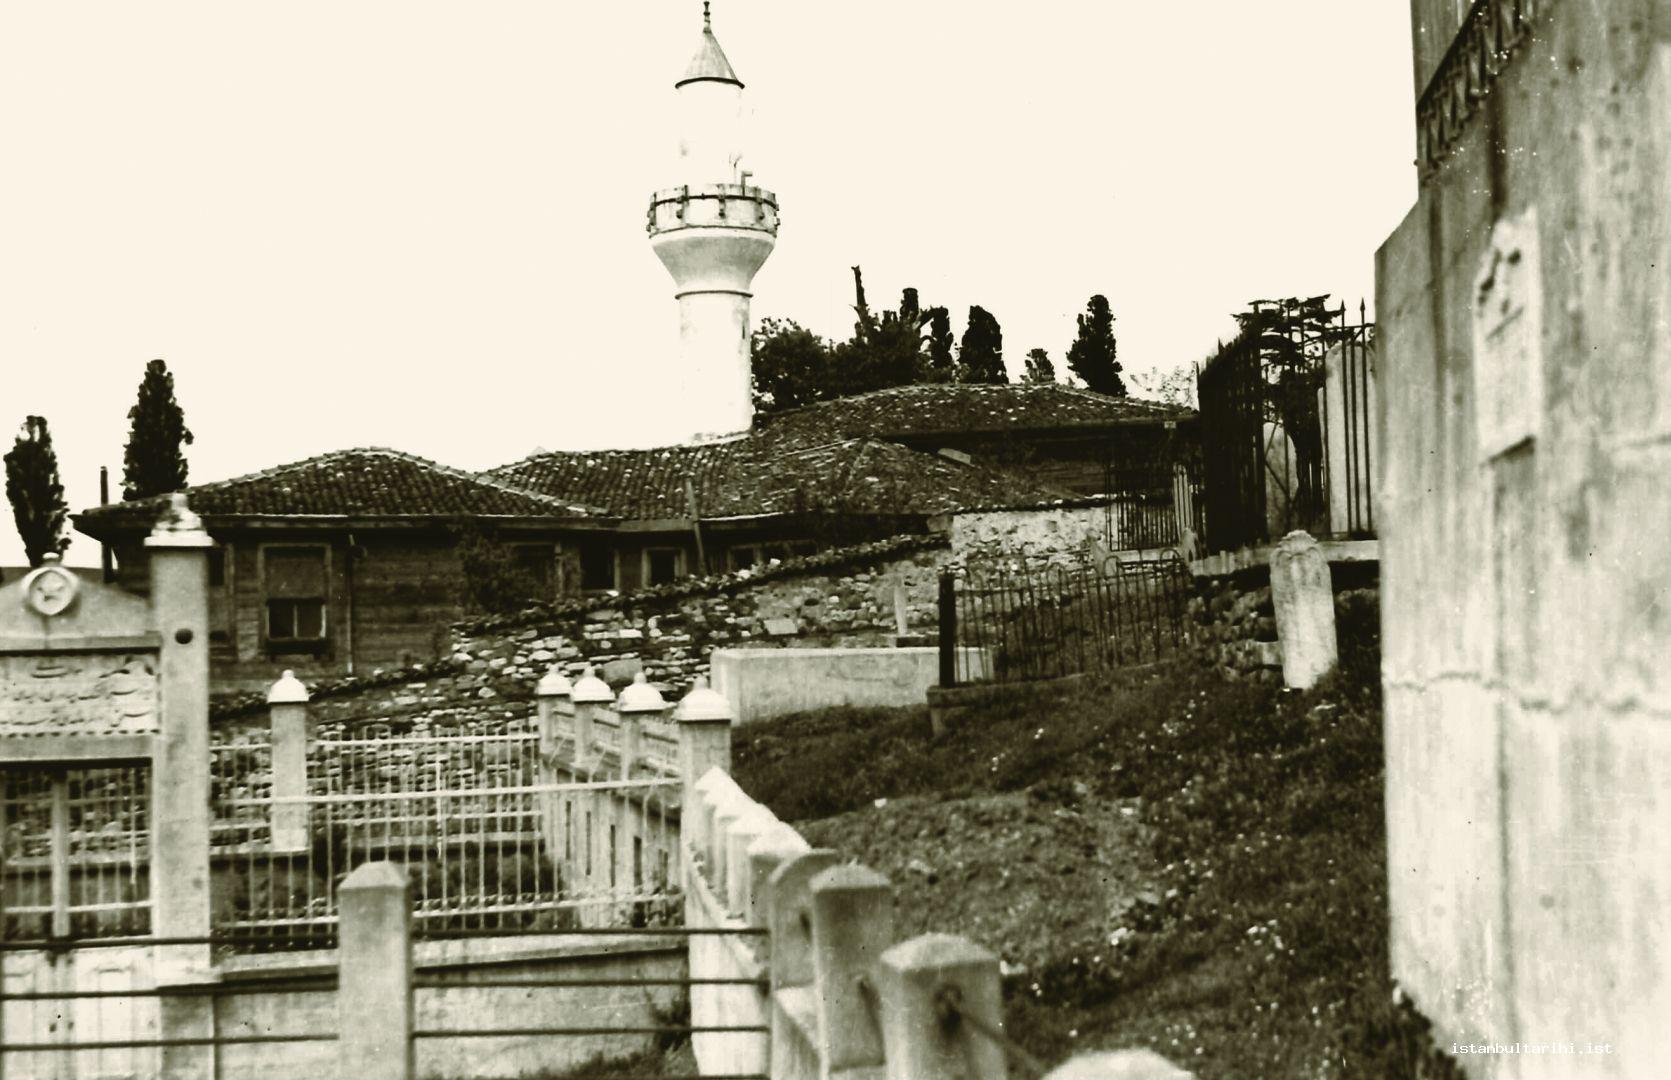 27- A general view of Kaşgari Sufi Lodge (Istanbul Metropolitan Municipality, The archive of the city Council, 1942)